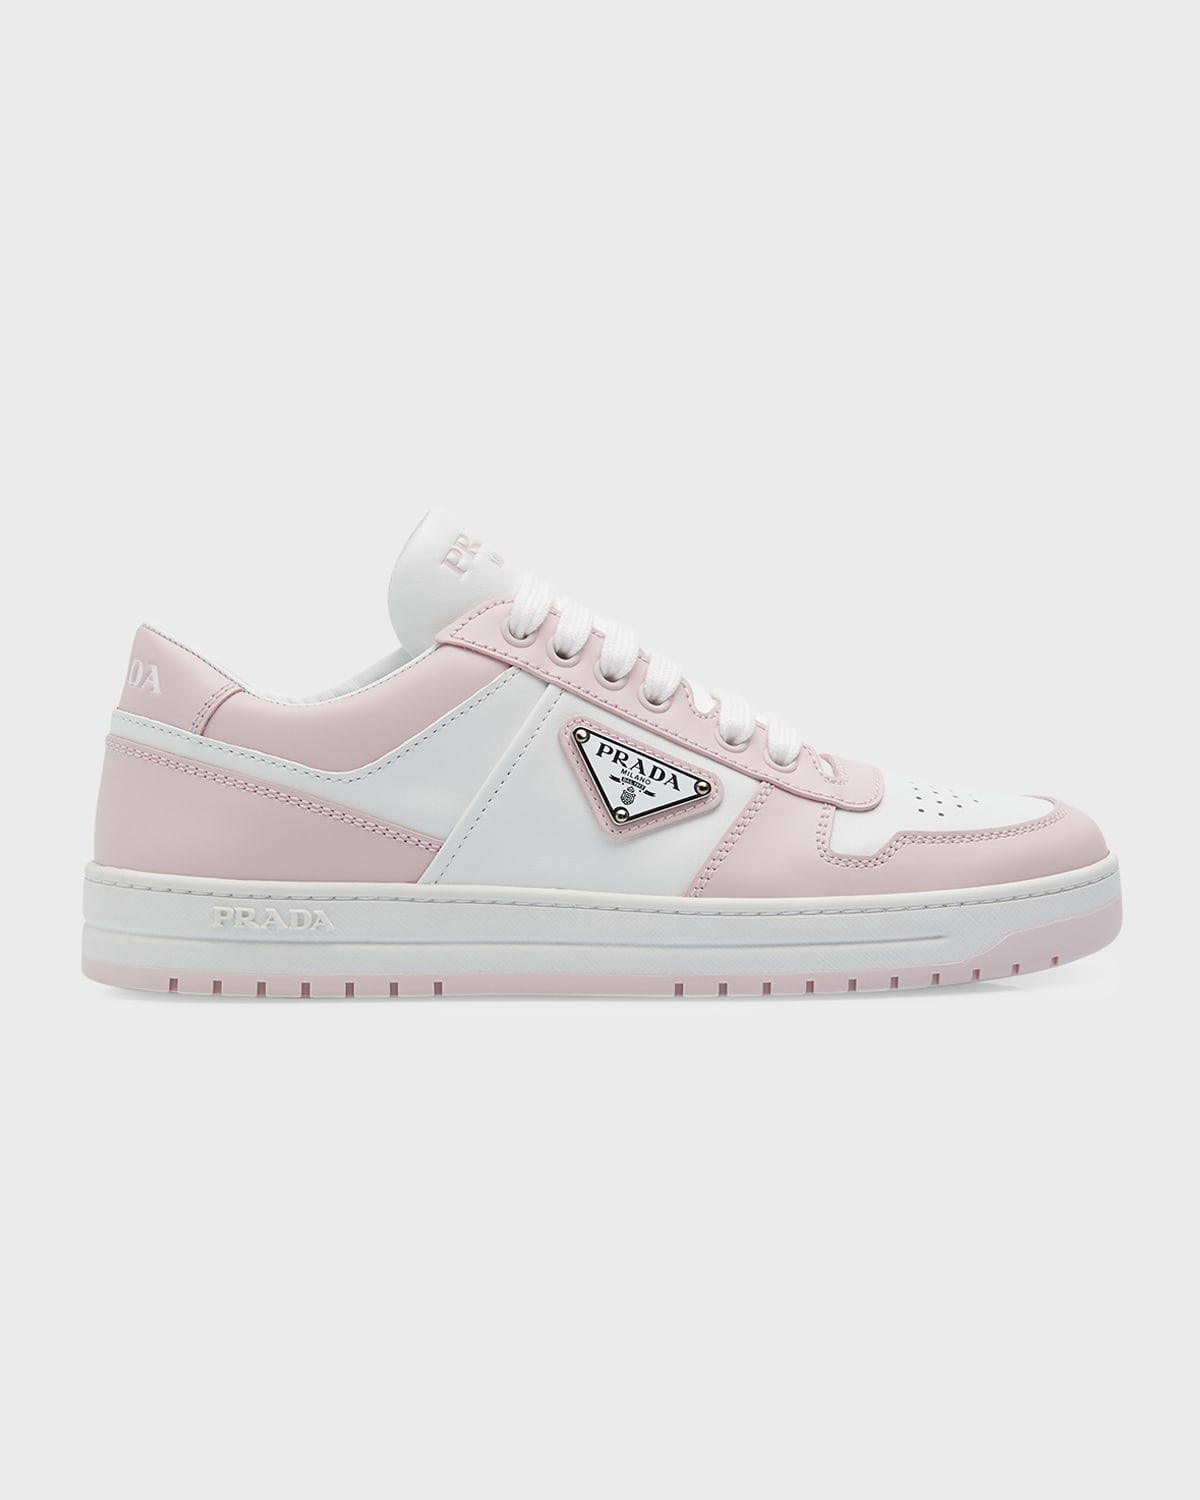 Prada Bicolor Leather Low-top Court Sneakers In Bianco+ala